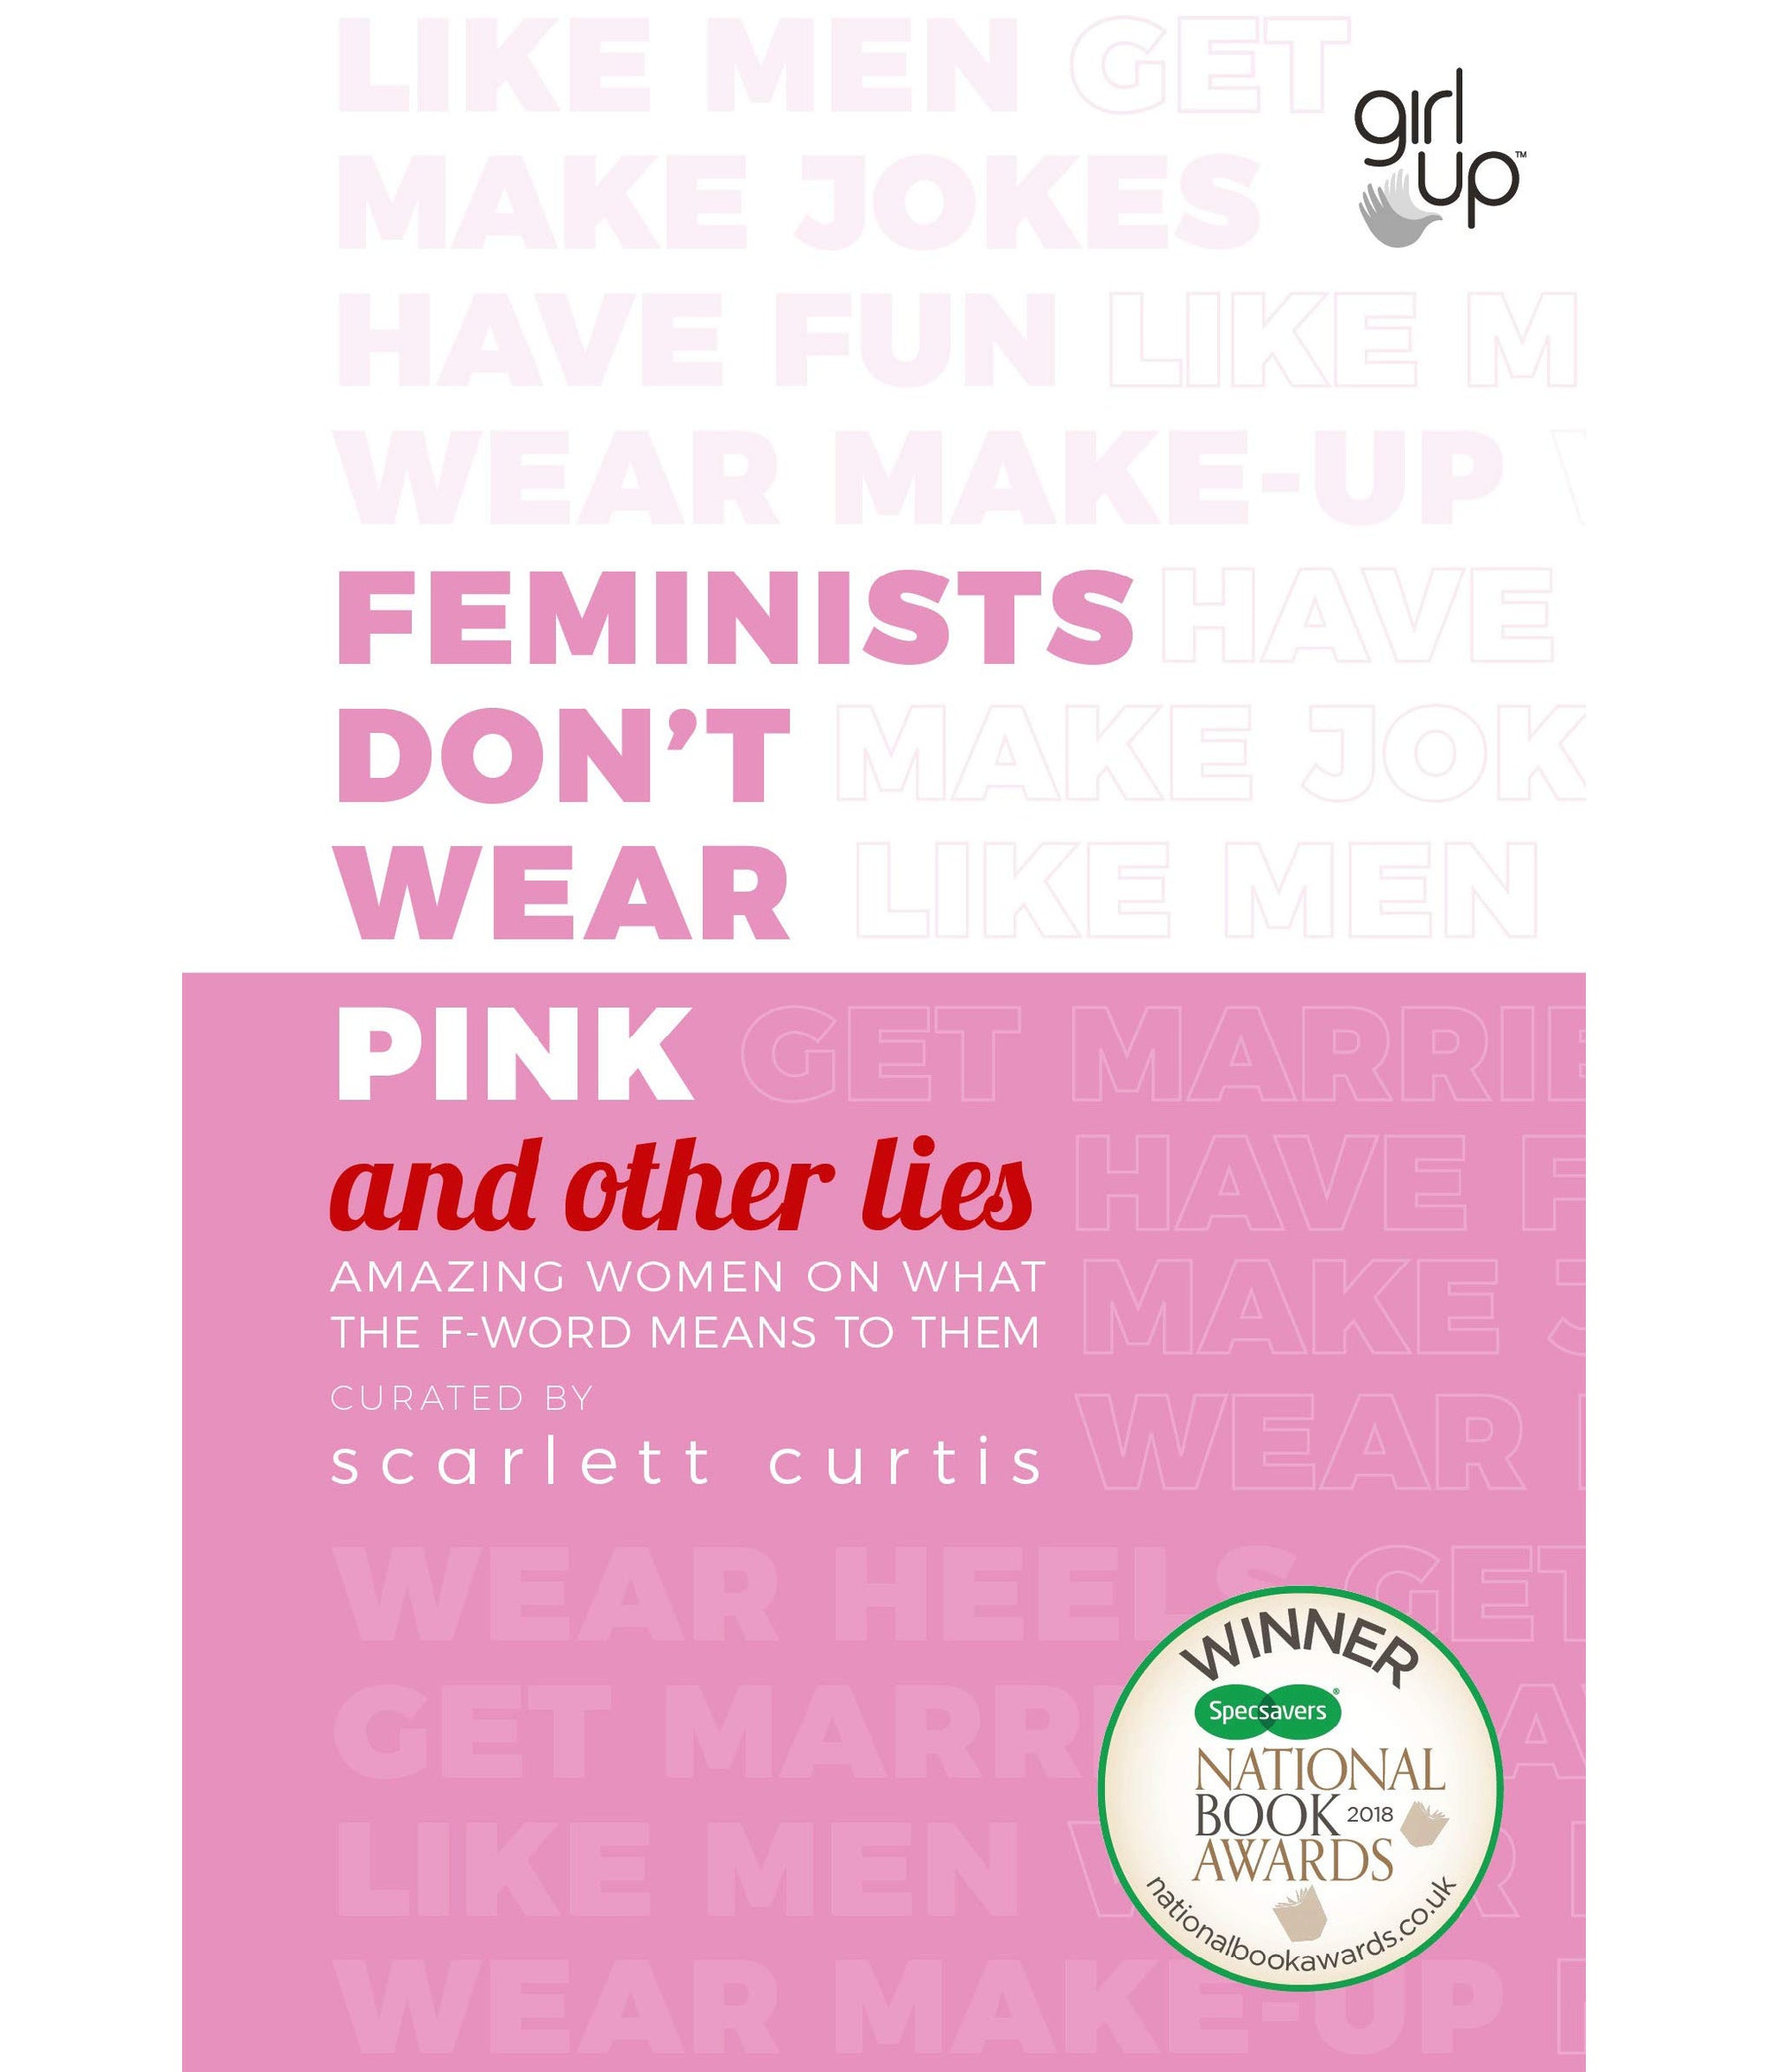 Feminists Don't Wear Pink (and other lies) by Scarlett Curtis